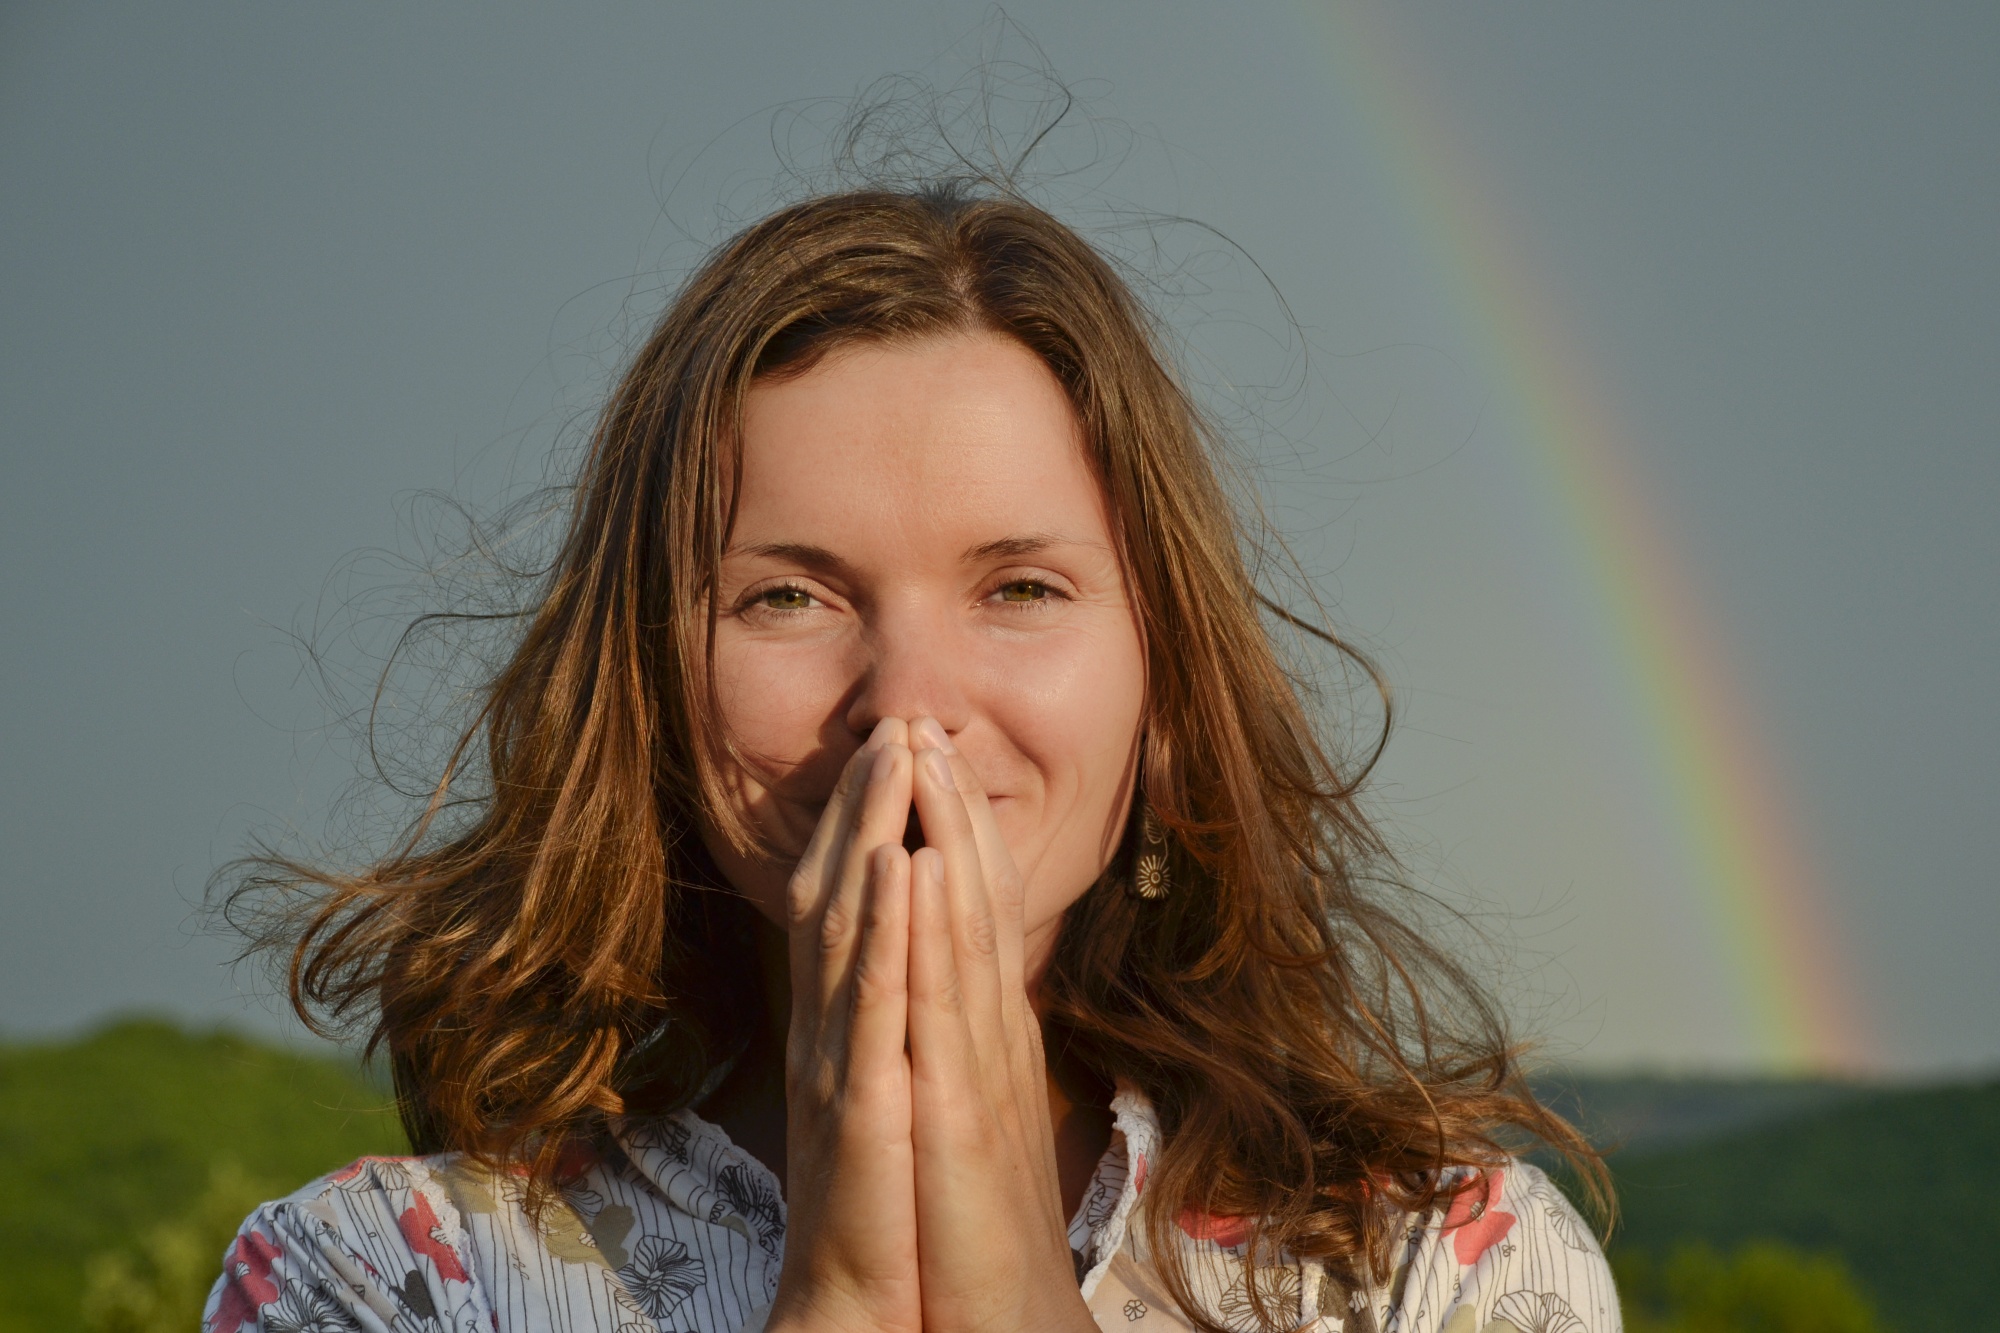 gratitude in small things: woman smiling with prayer hands in front of her face and a rainbow in the background